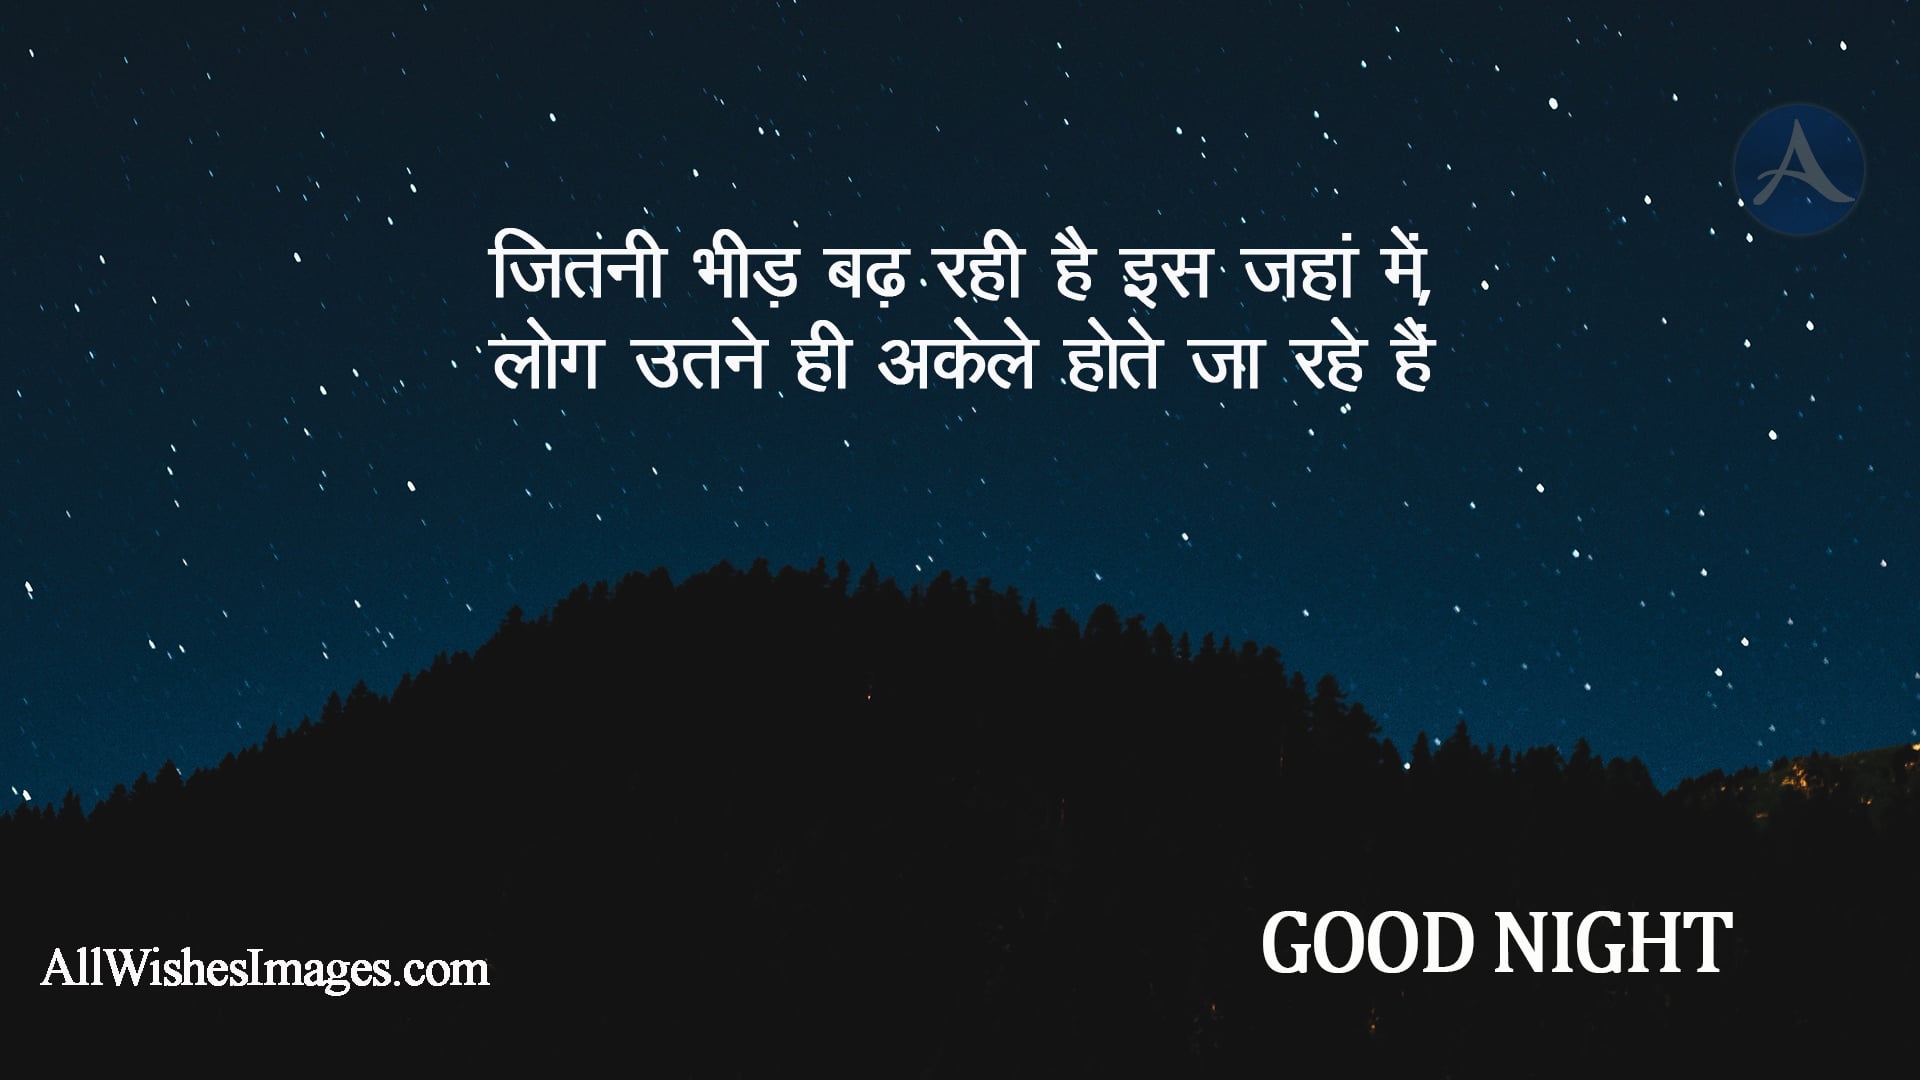 Sad Good Night Images Hindi - All Wishes Images - Images for WhatsApp